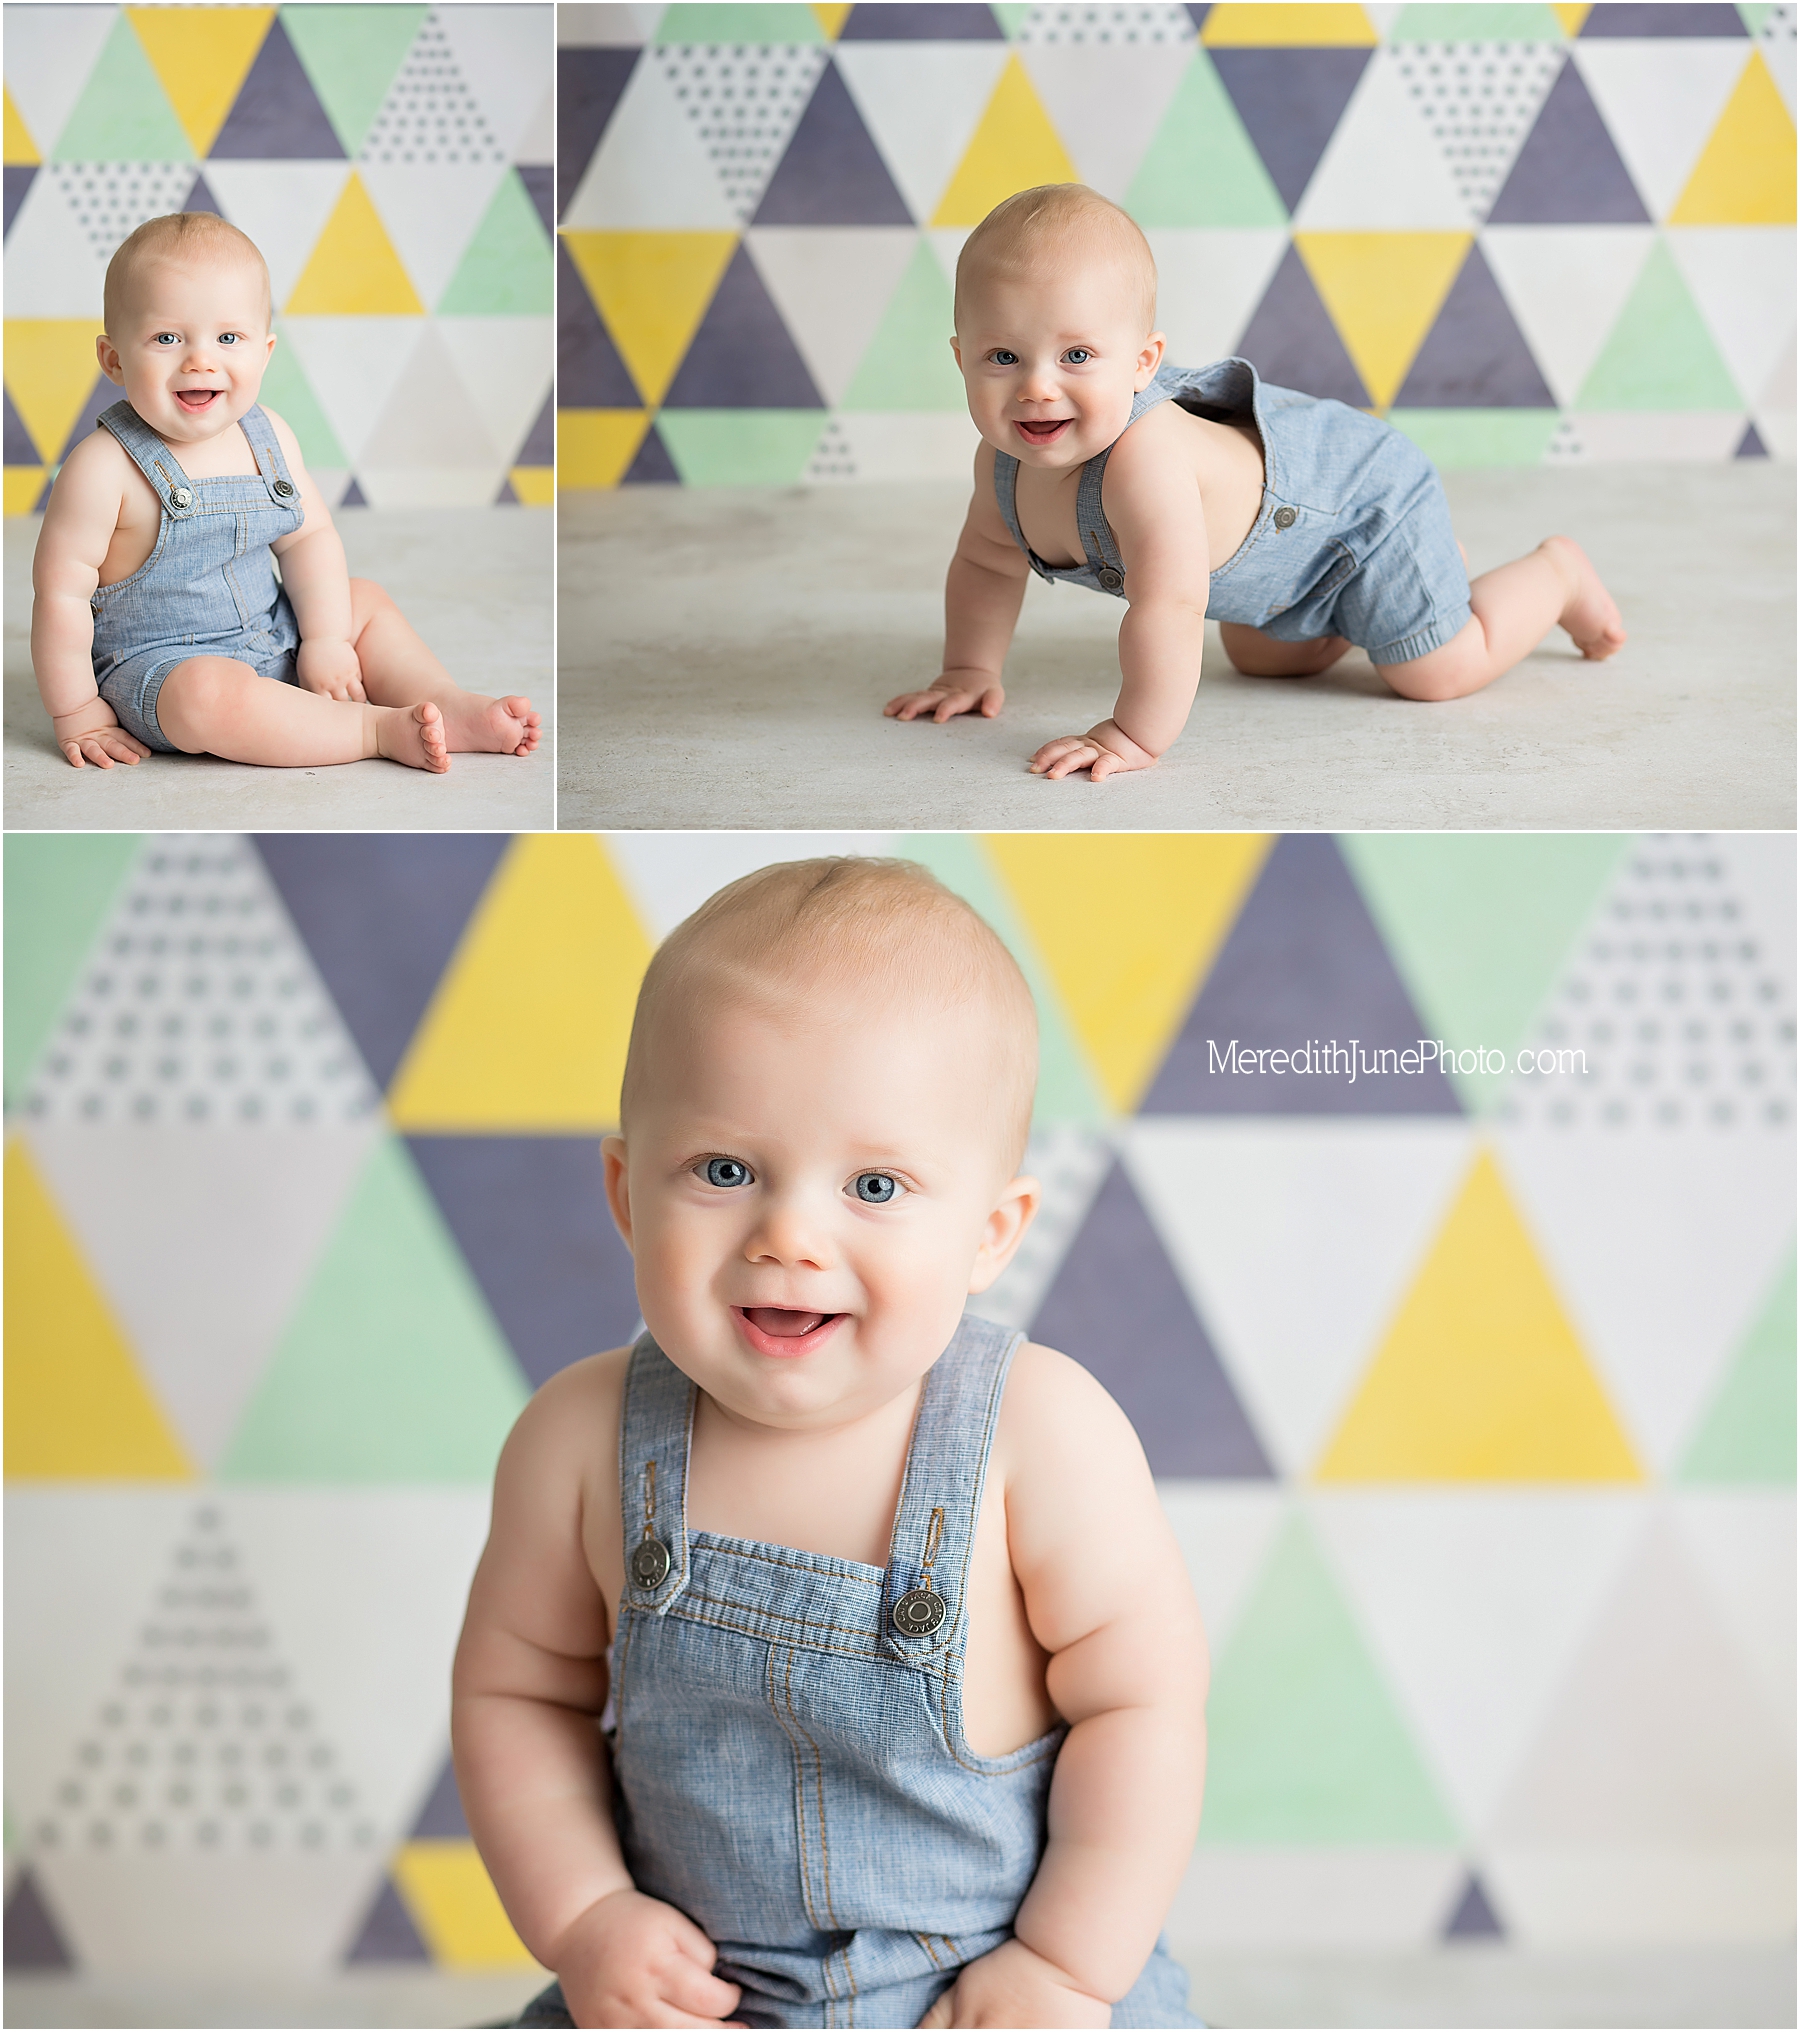 Adorable milestone session for baby boy